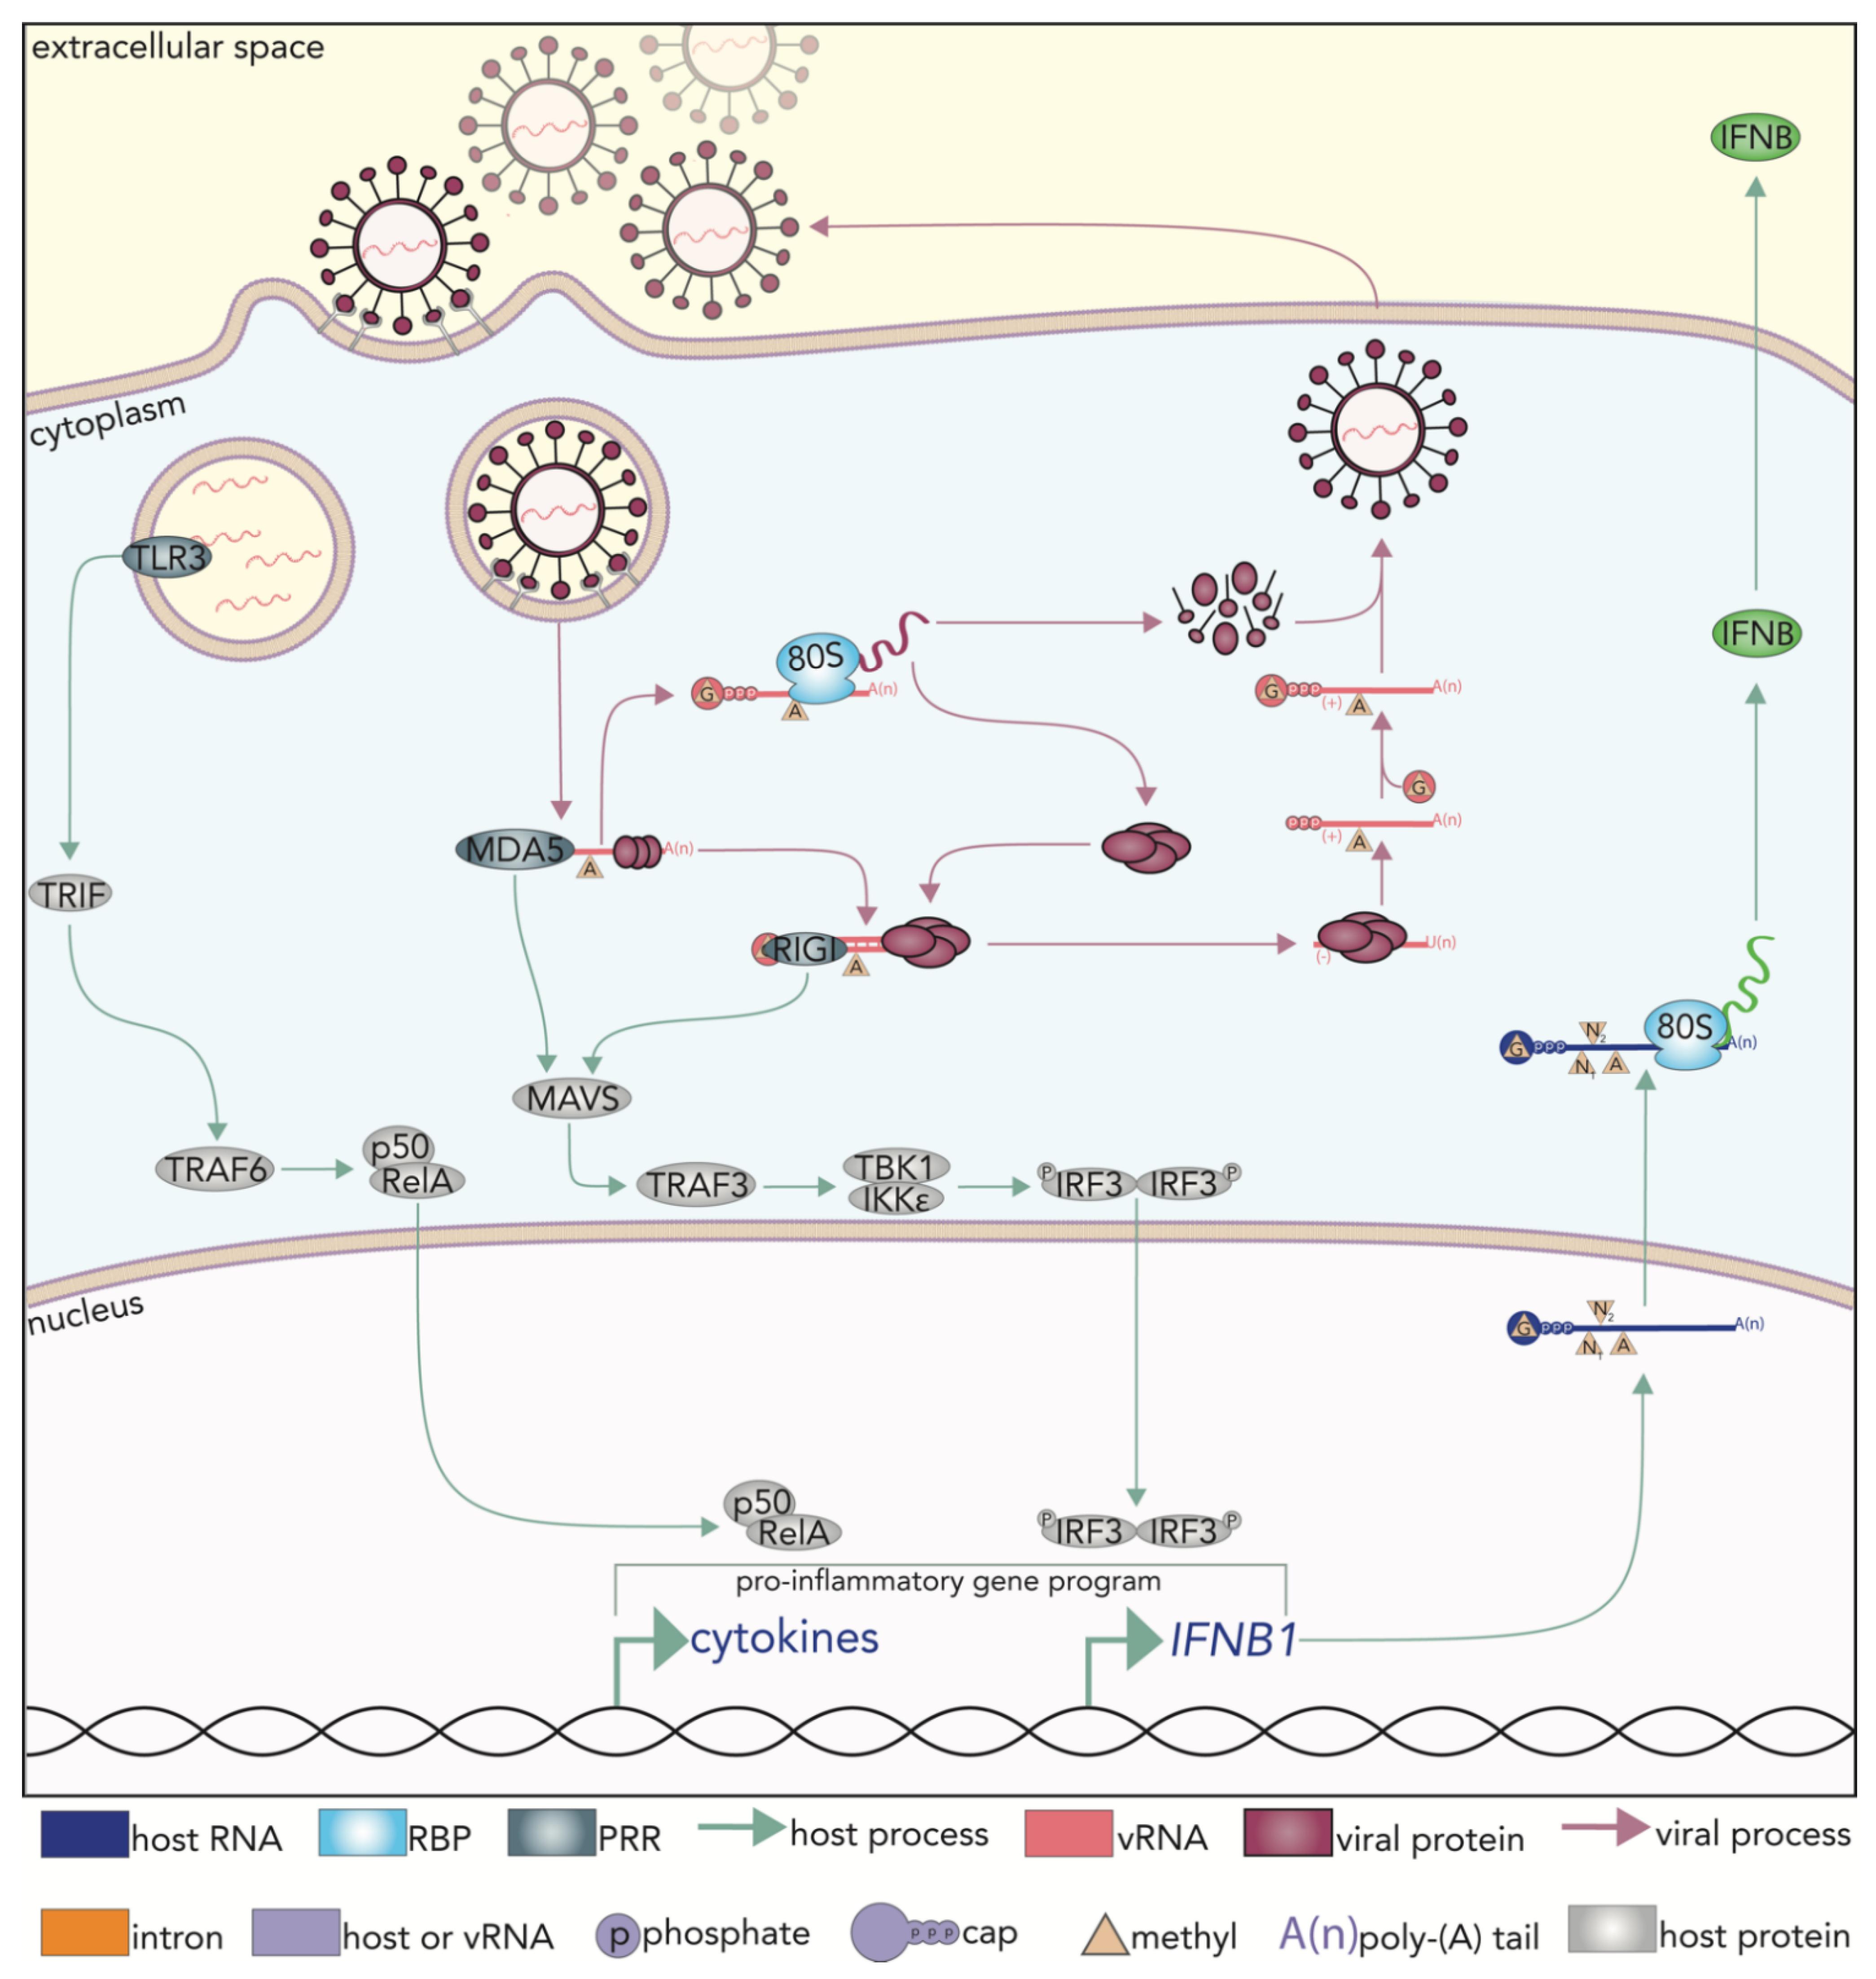 Utility of Proteomics in Emerging and Re-Emerging Infectious Diseases  Caused by RNA Viruses